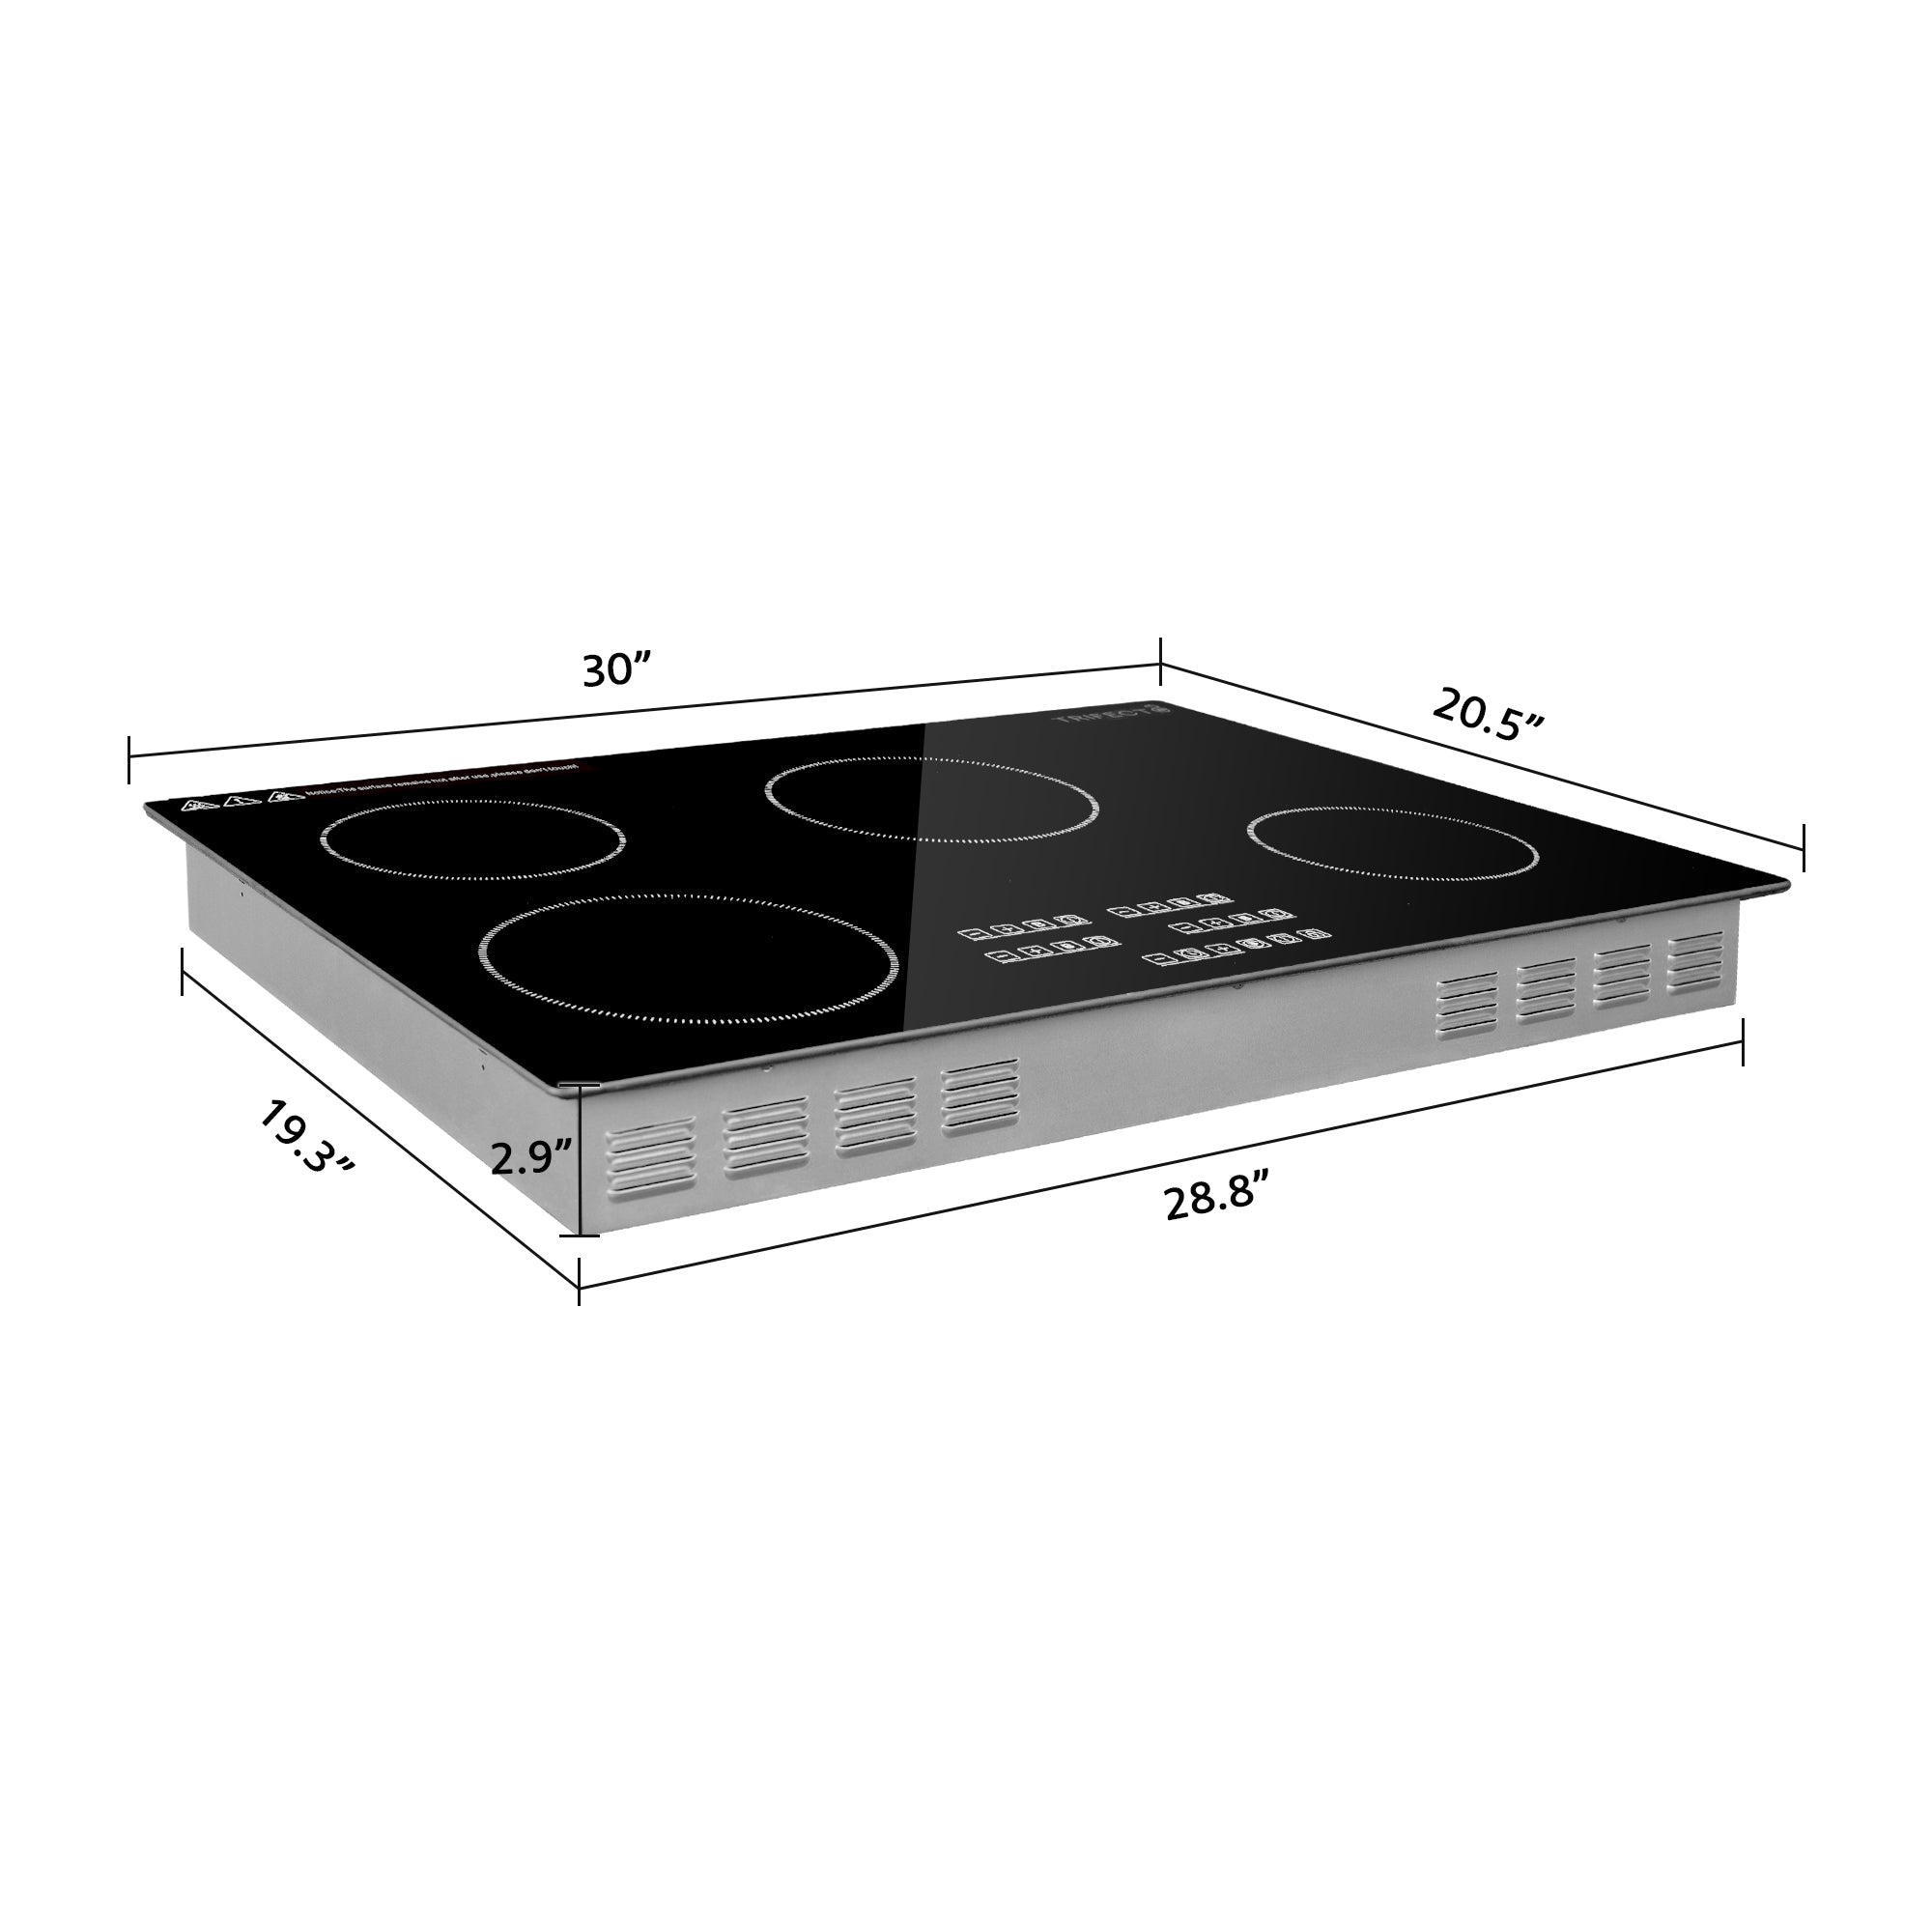 the dimension information about the cooktop ranges with induction 